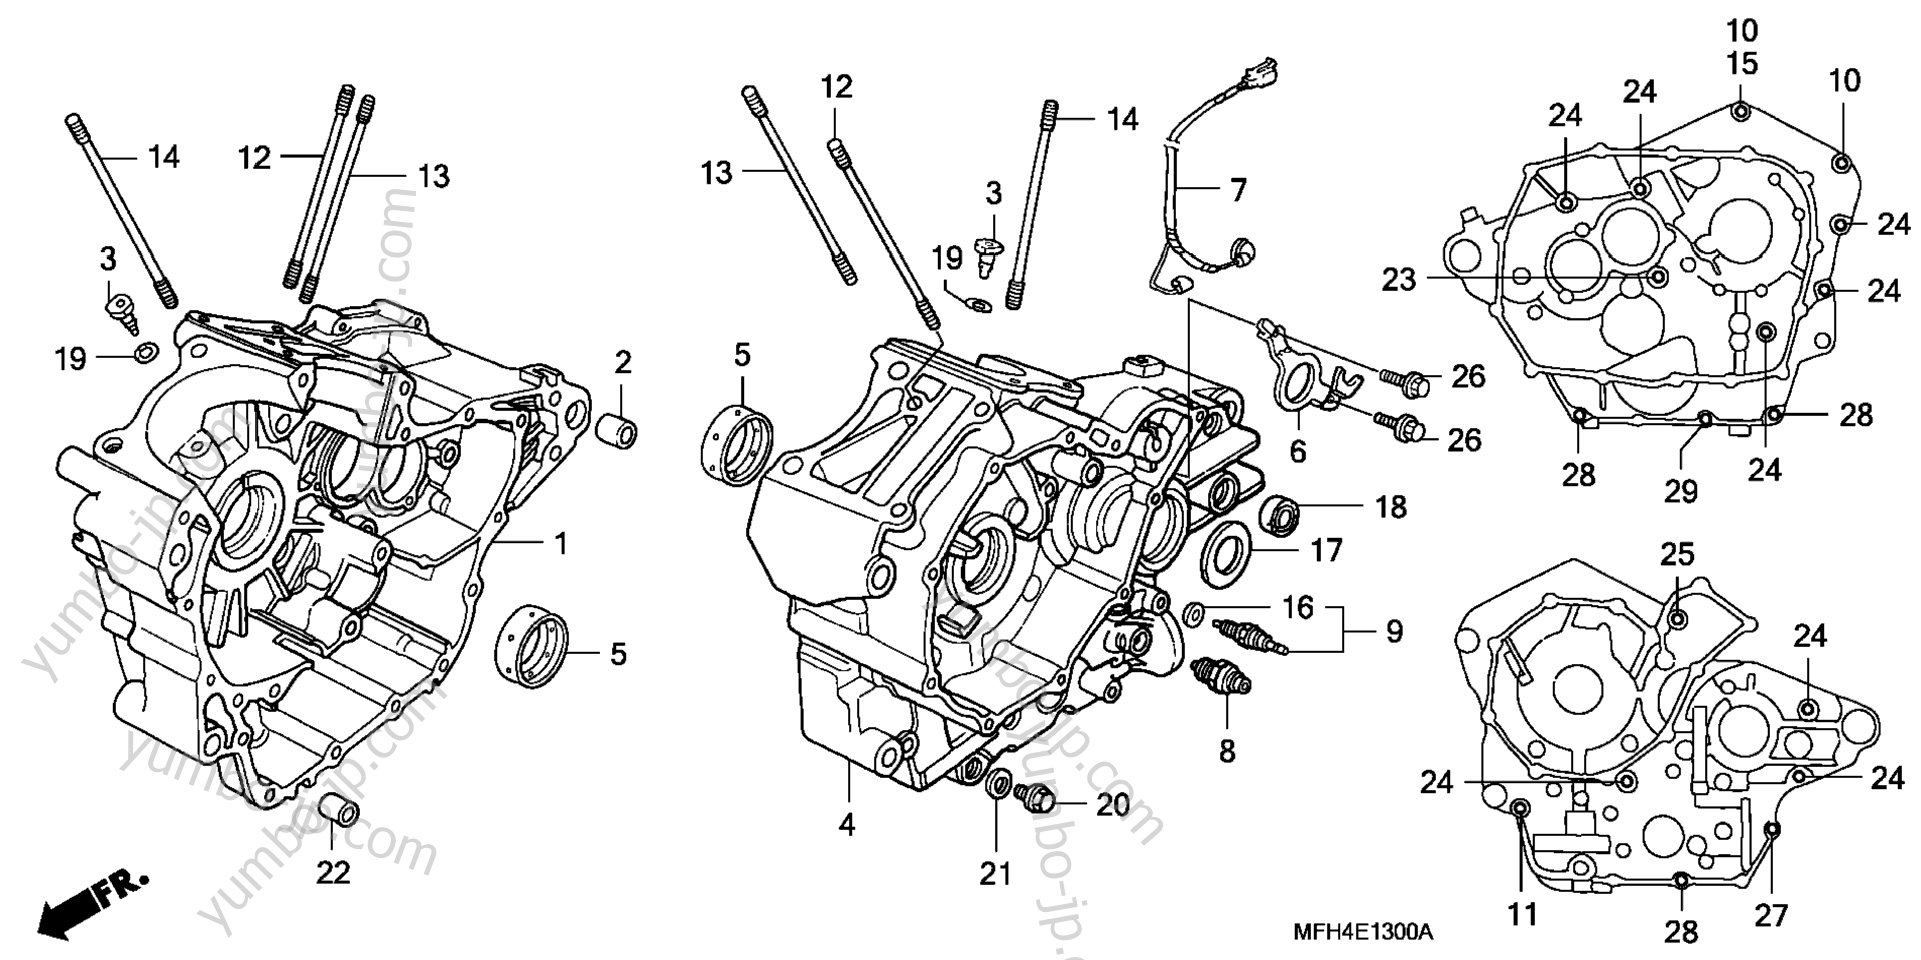 CRANKCASE for motorcycles HONDA VT600C A 2007 year